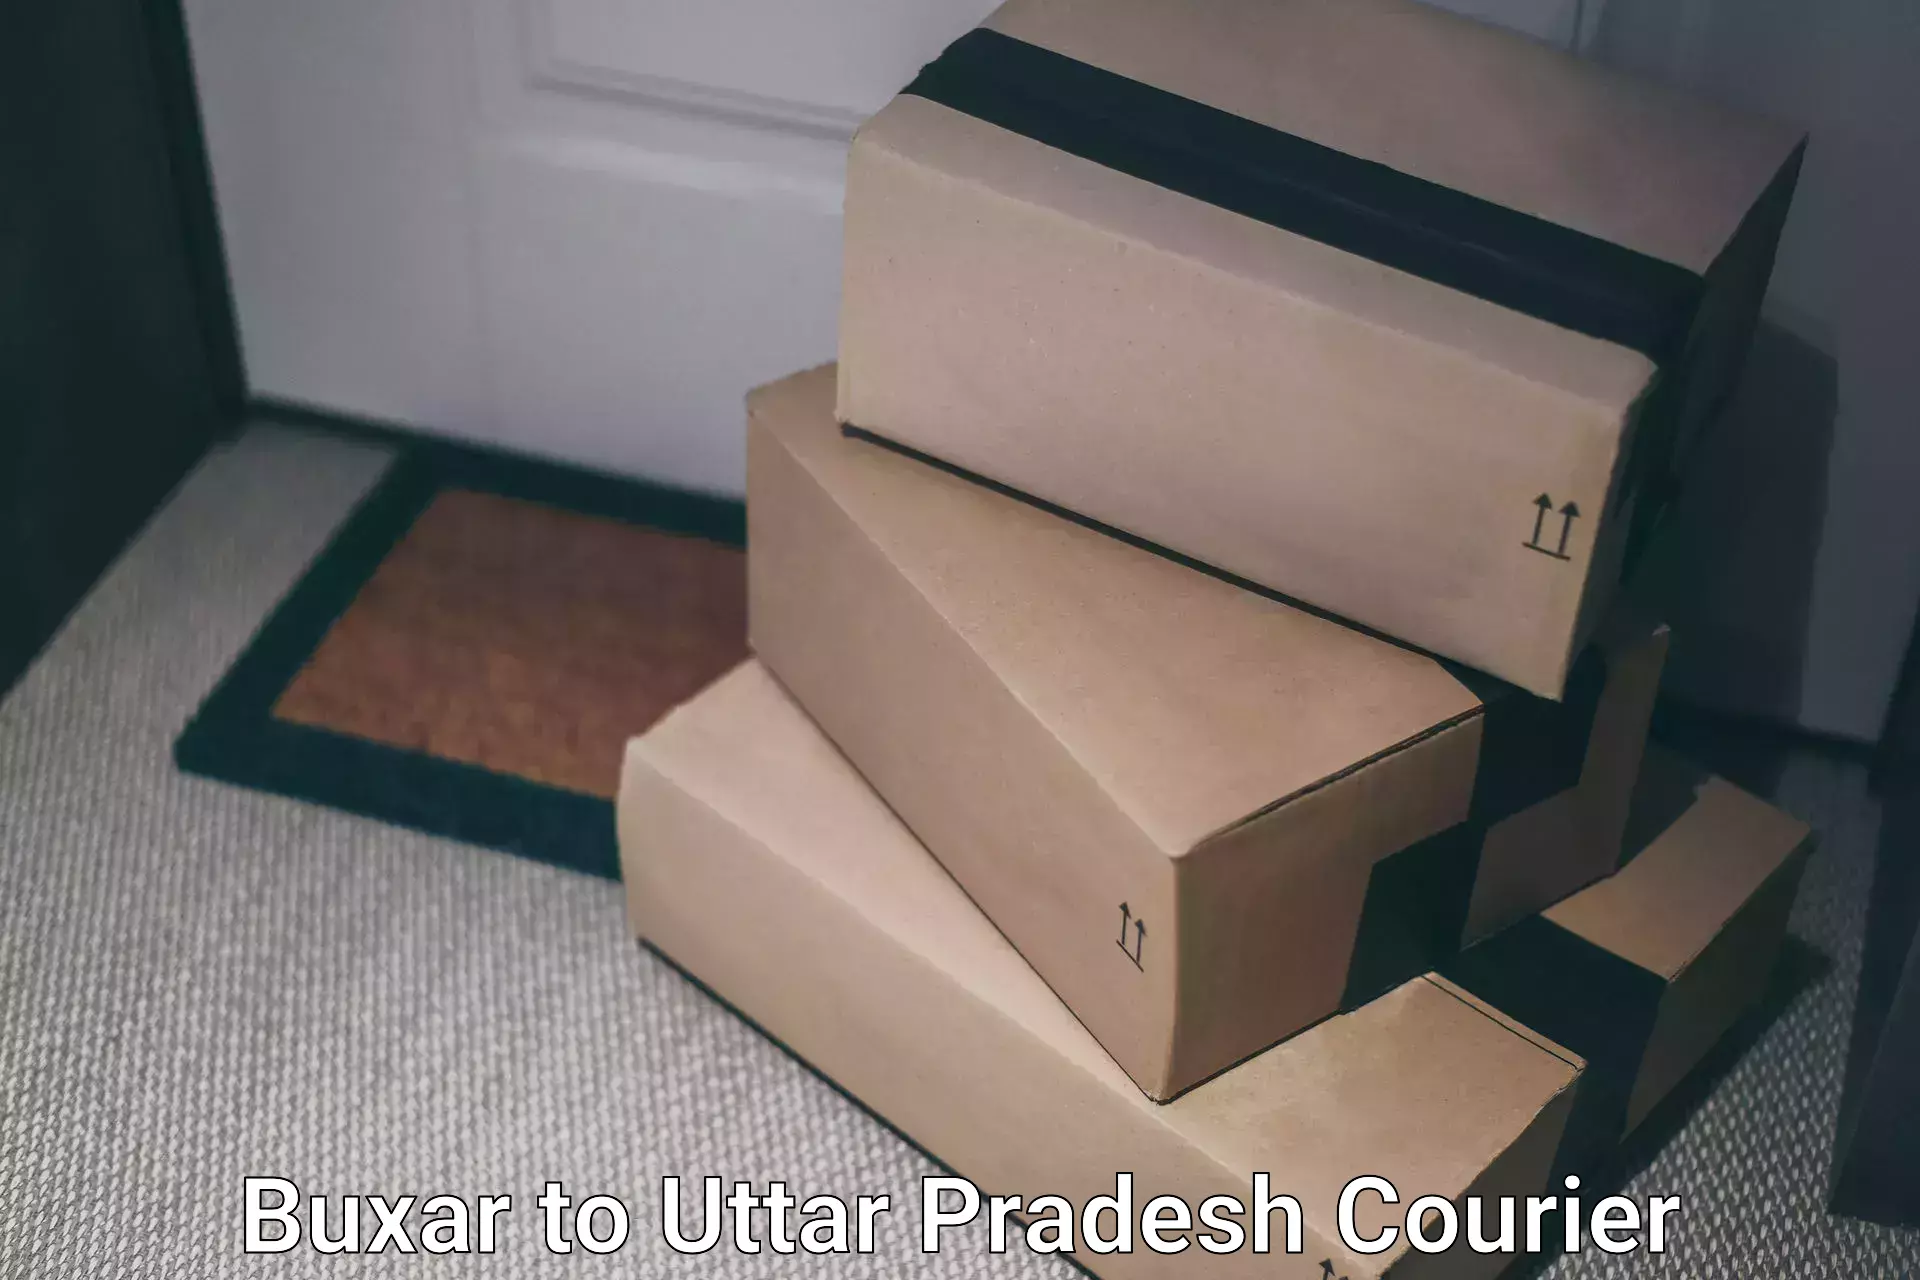 Courier service comparison Buxar to Jalalabad Shahjahanpur